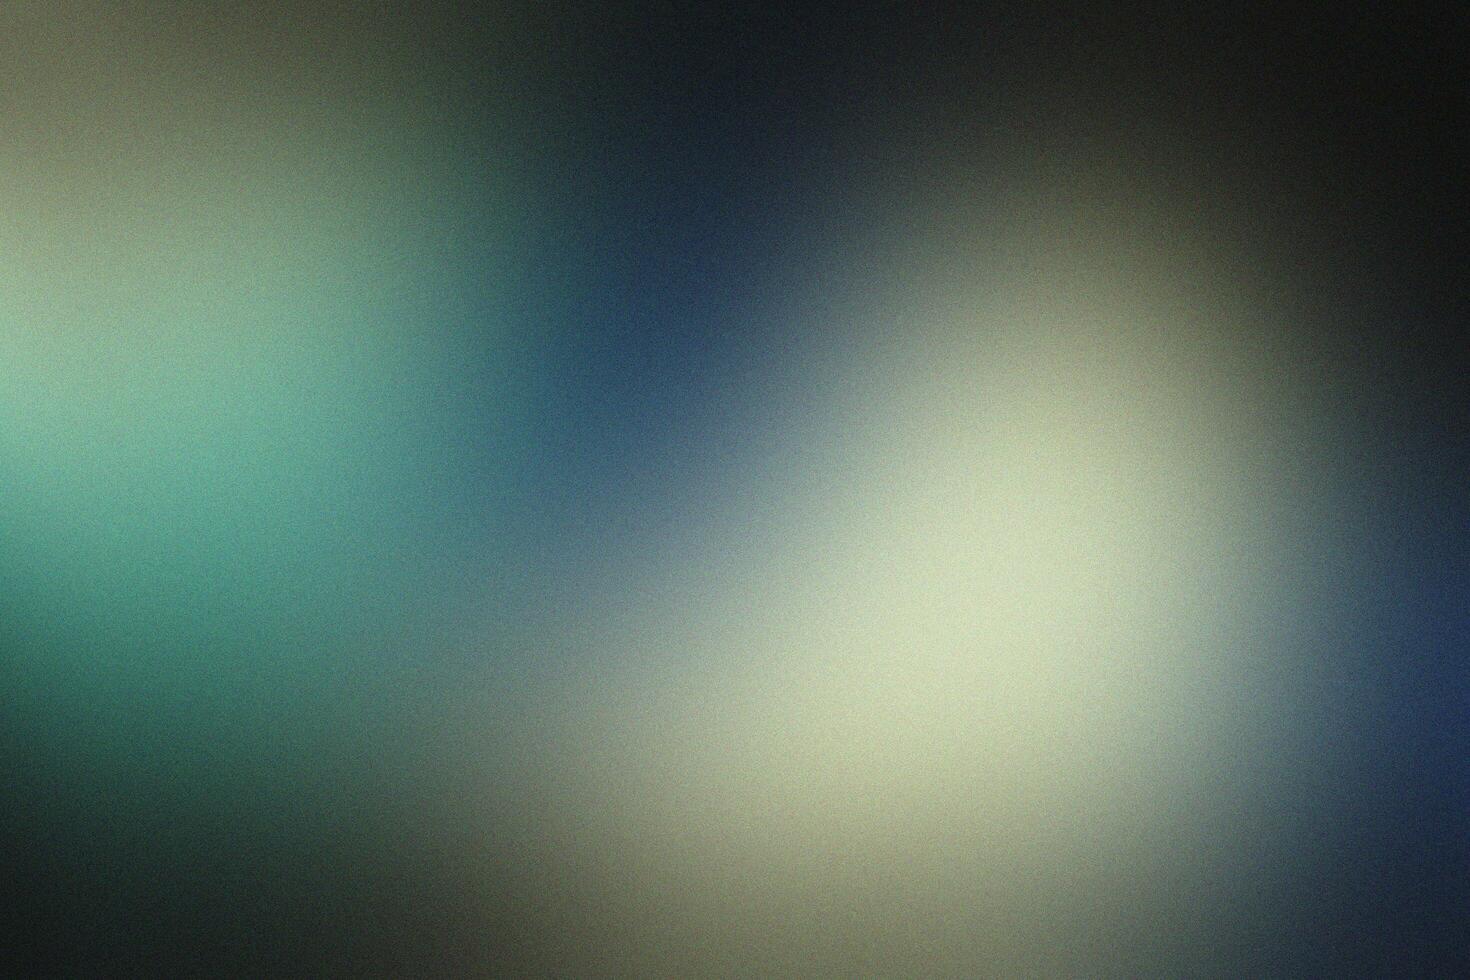 Abstract Black, Blue and White Gradient Background with Grainy Texture photo